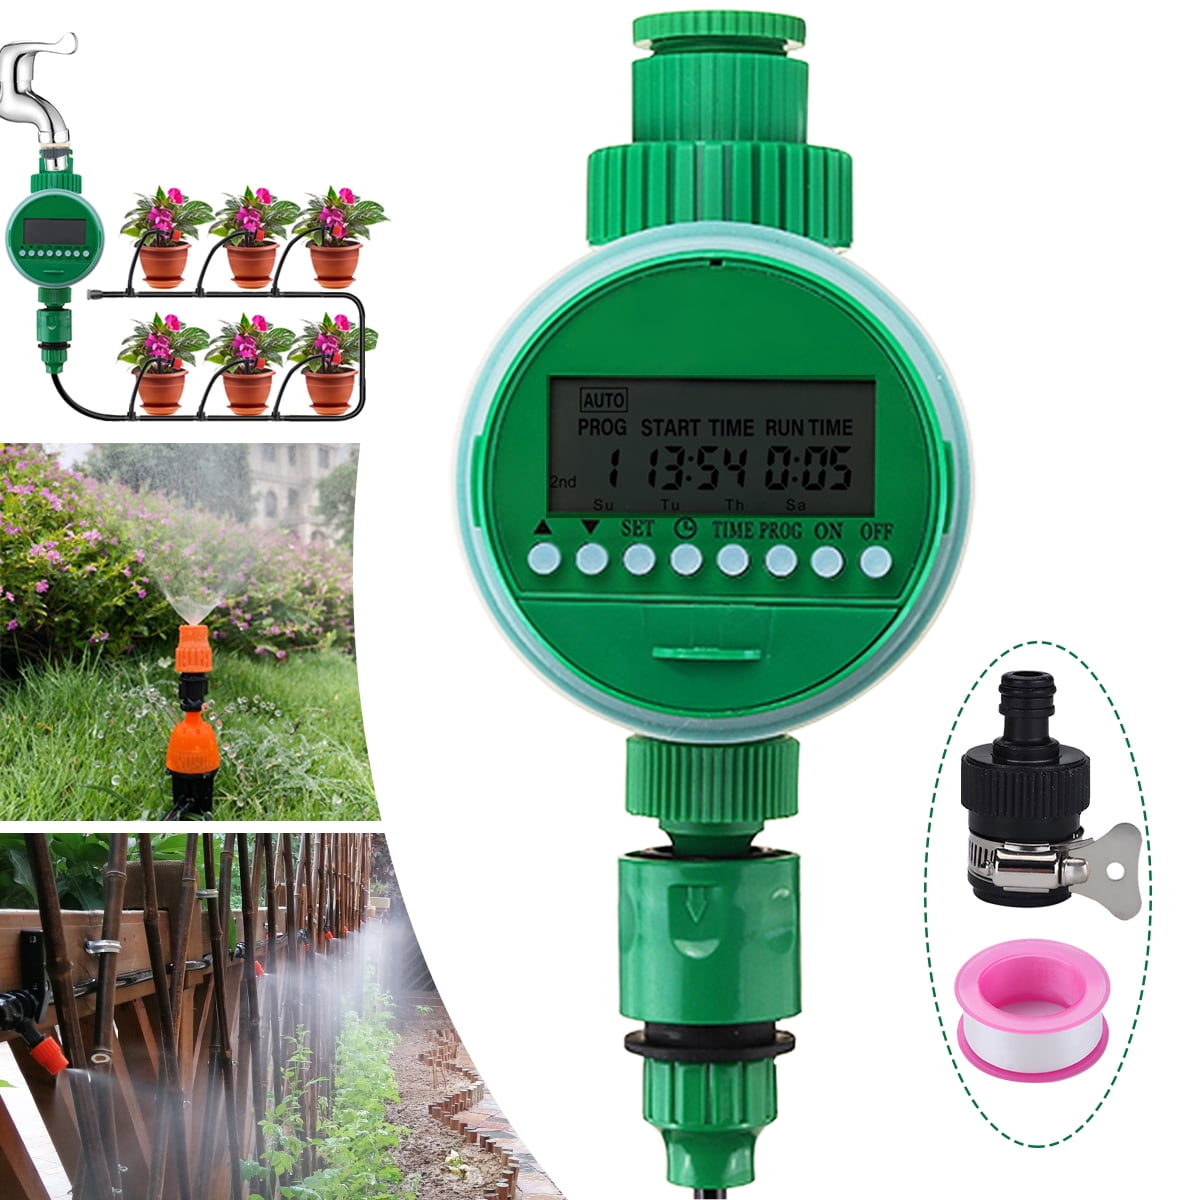 SOLAR AUTOMATIC ELECTRONIC WATER TIMER GARDEN IRRIGATION PLANT WATERING TIMER 